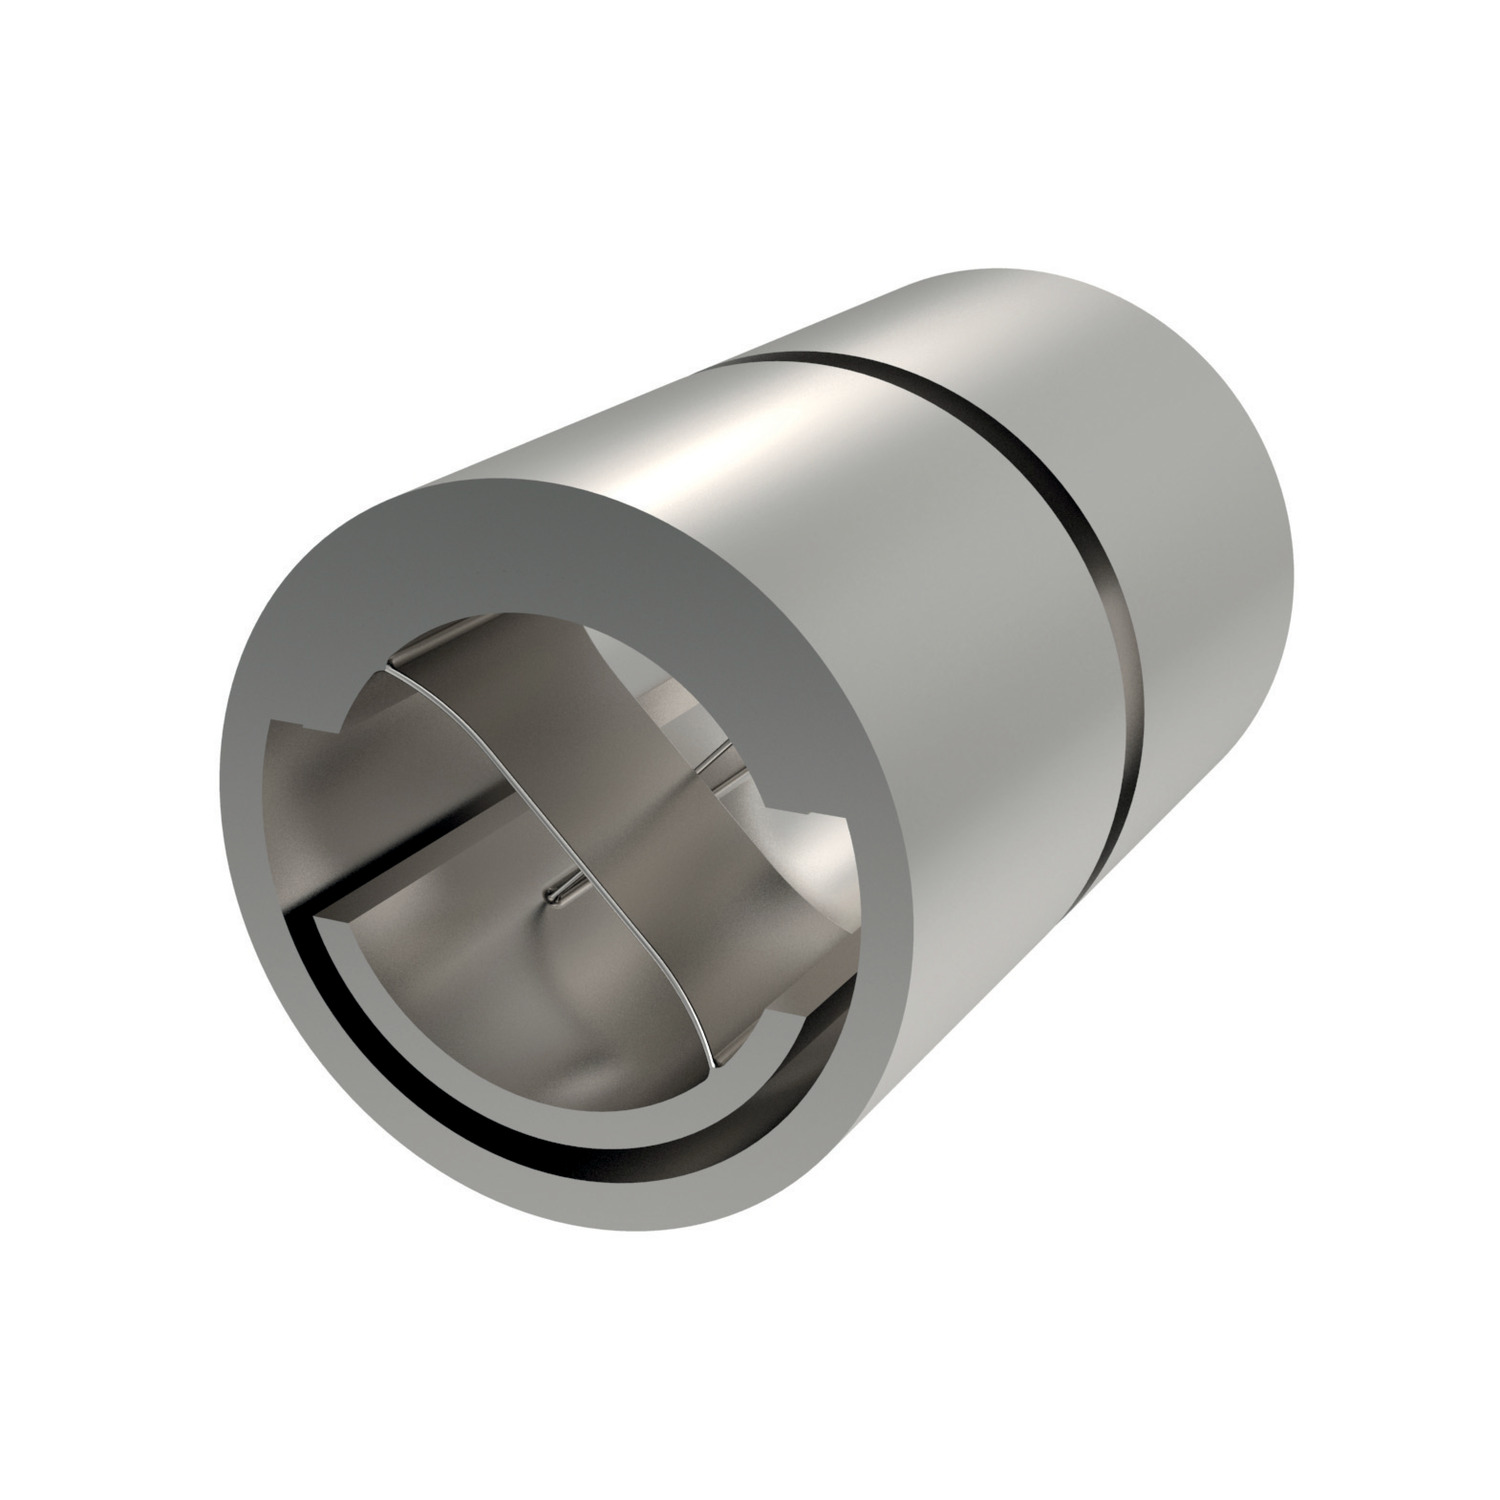 Flexure Pivot Bearings Single-ended flex pivot bearingsStainless steel with operating temperature from -35°C to +190°C.